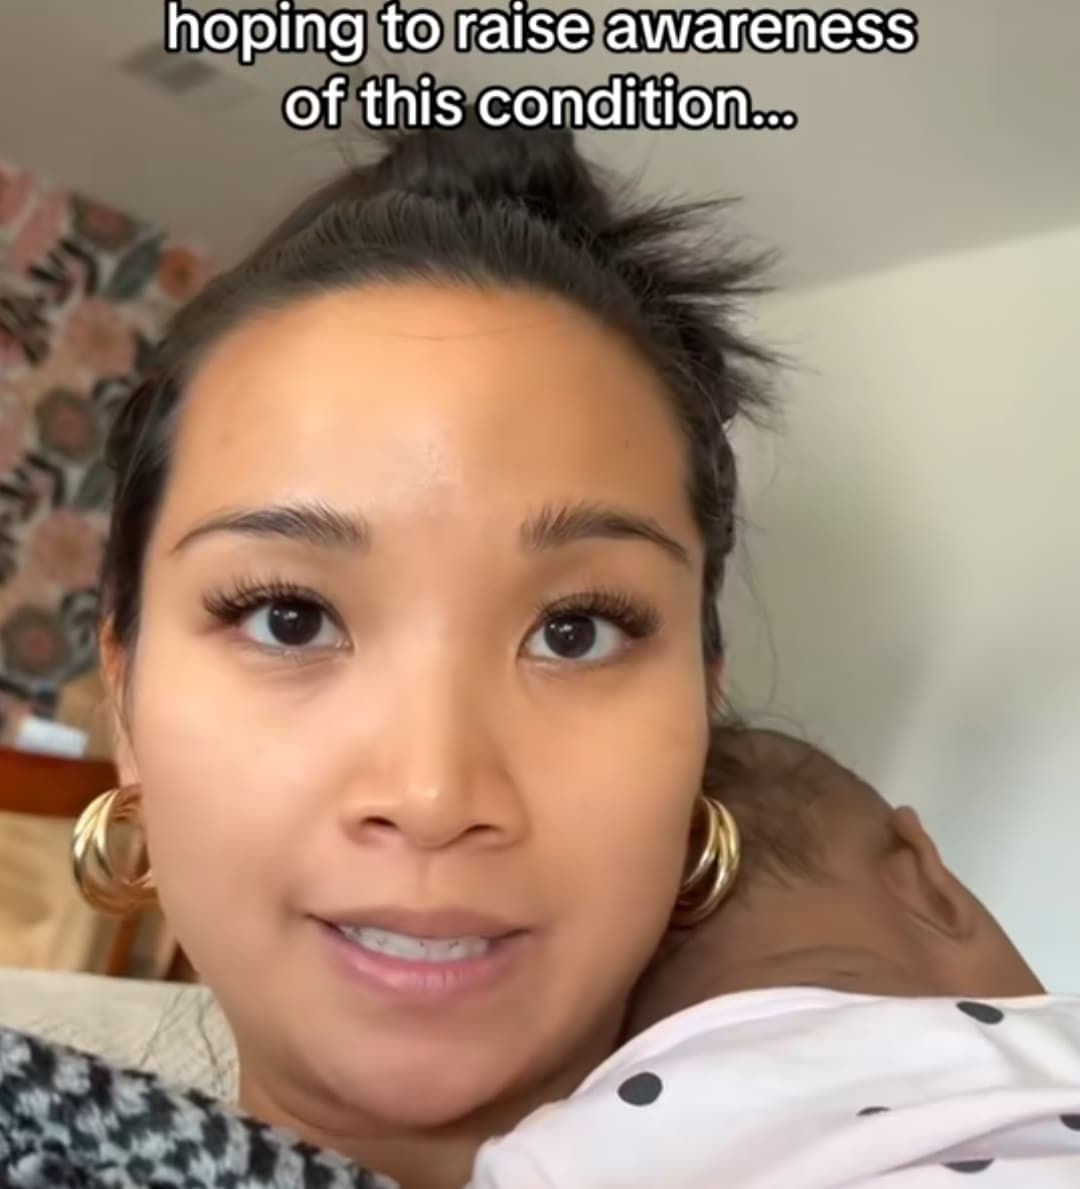 Mother breaks the internet with video of newborn daughter with a complete set of teeth